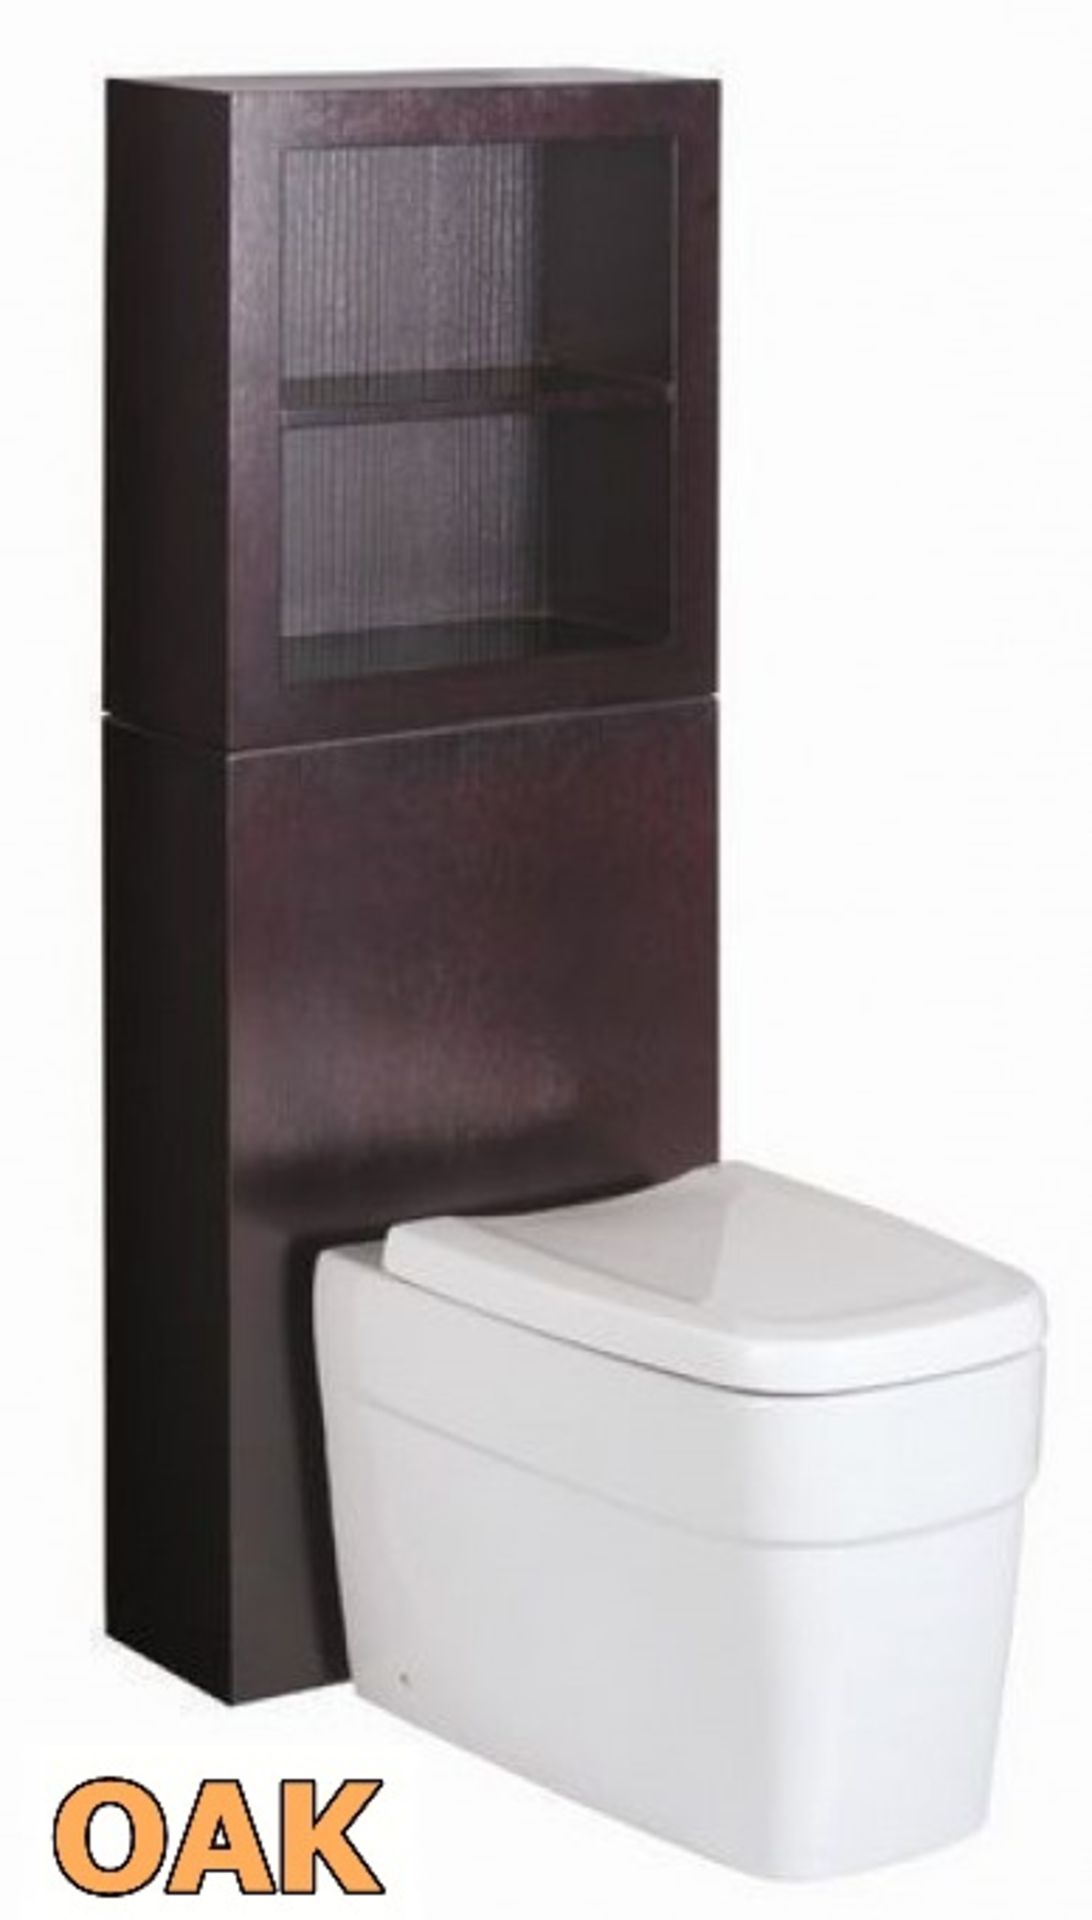 1 x Vogue ARC Series 2 Back to Wall TOILET PAN CISTERN UNIT With Additional Top Shelf Unit - OAK - Image 2 of 2